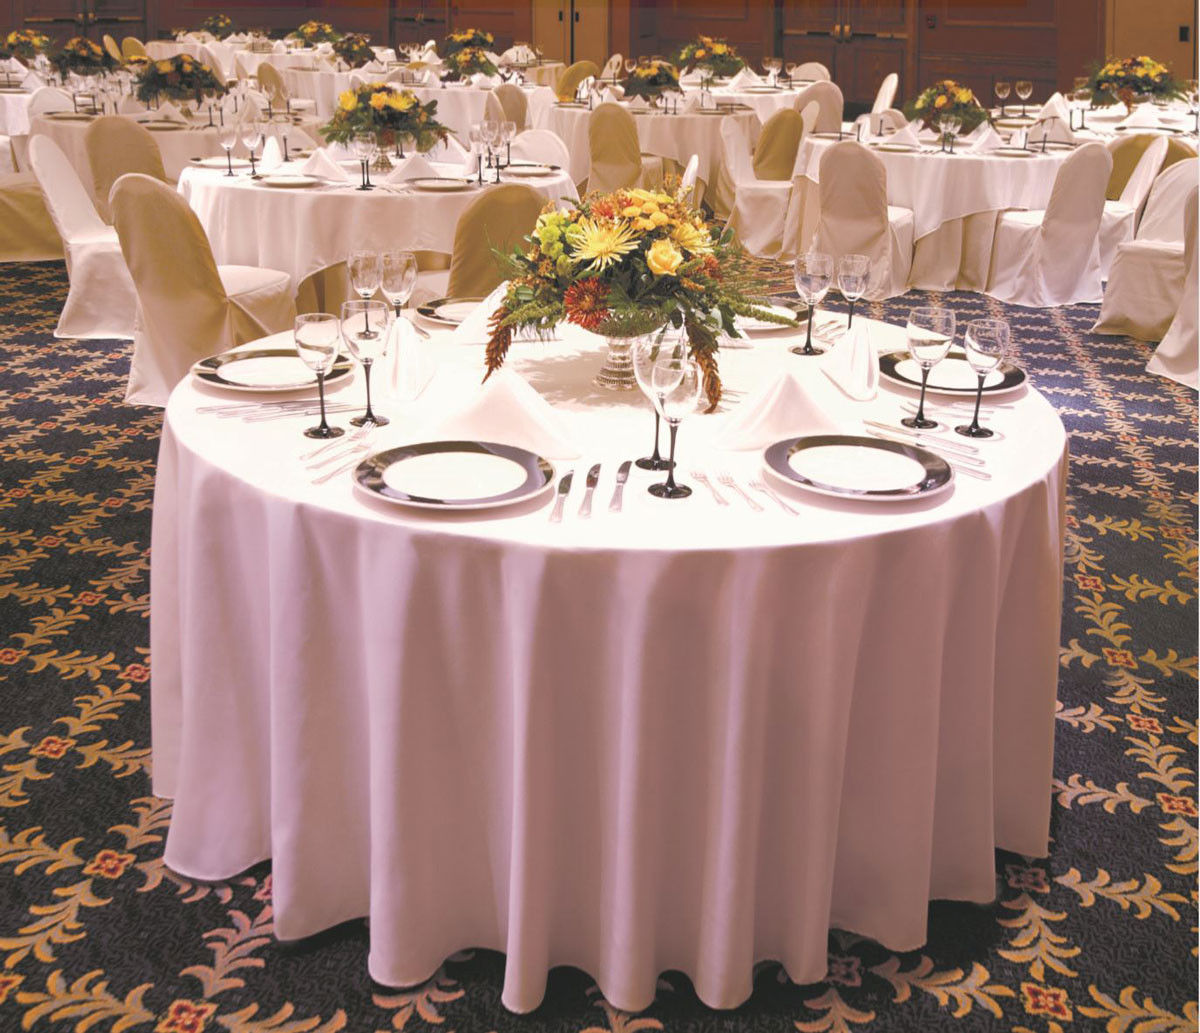 How large is the 132 inch round tablecloth by Milliken Horizon?